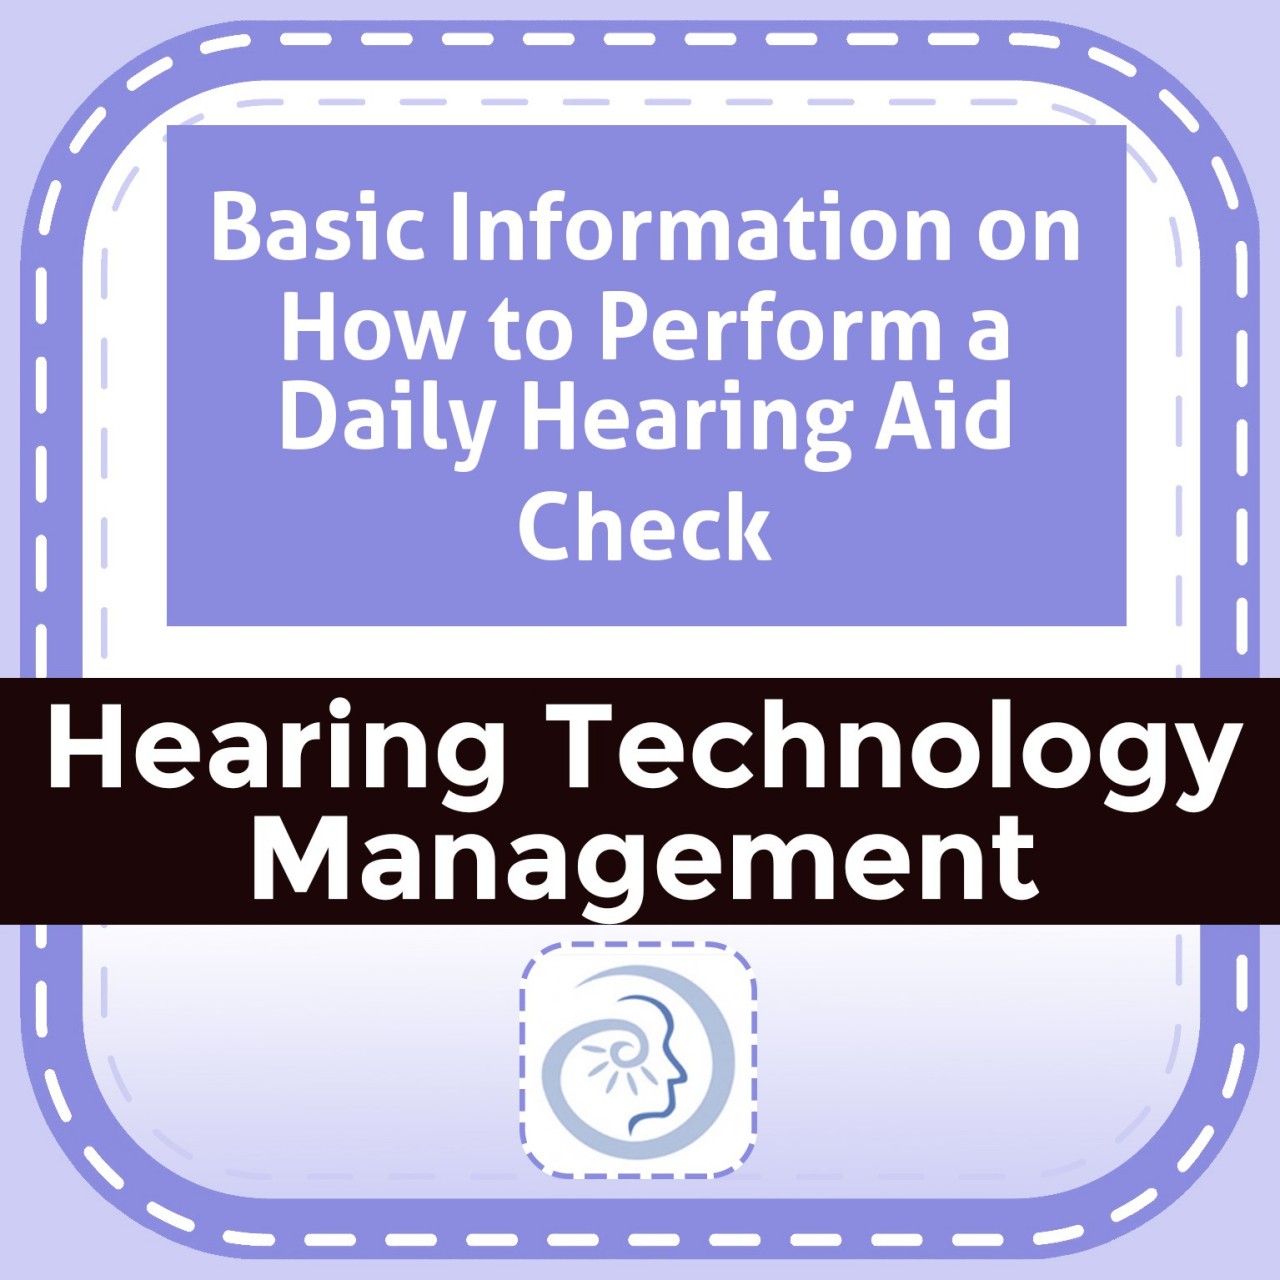 Basic Information on How to Perform a Daily Hearing Aid Check